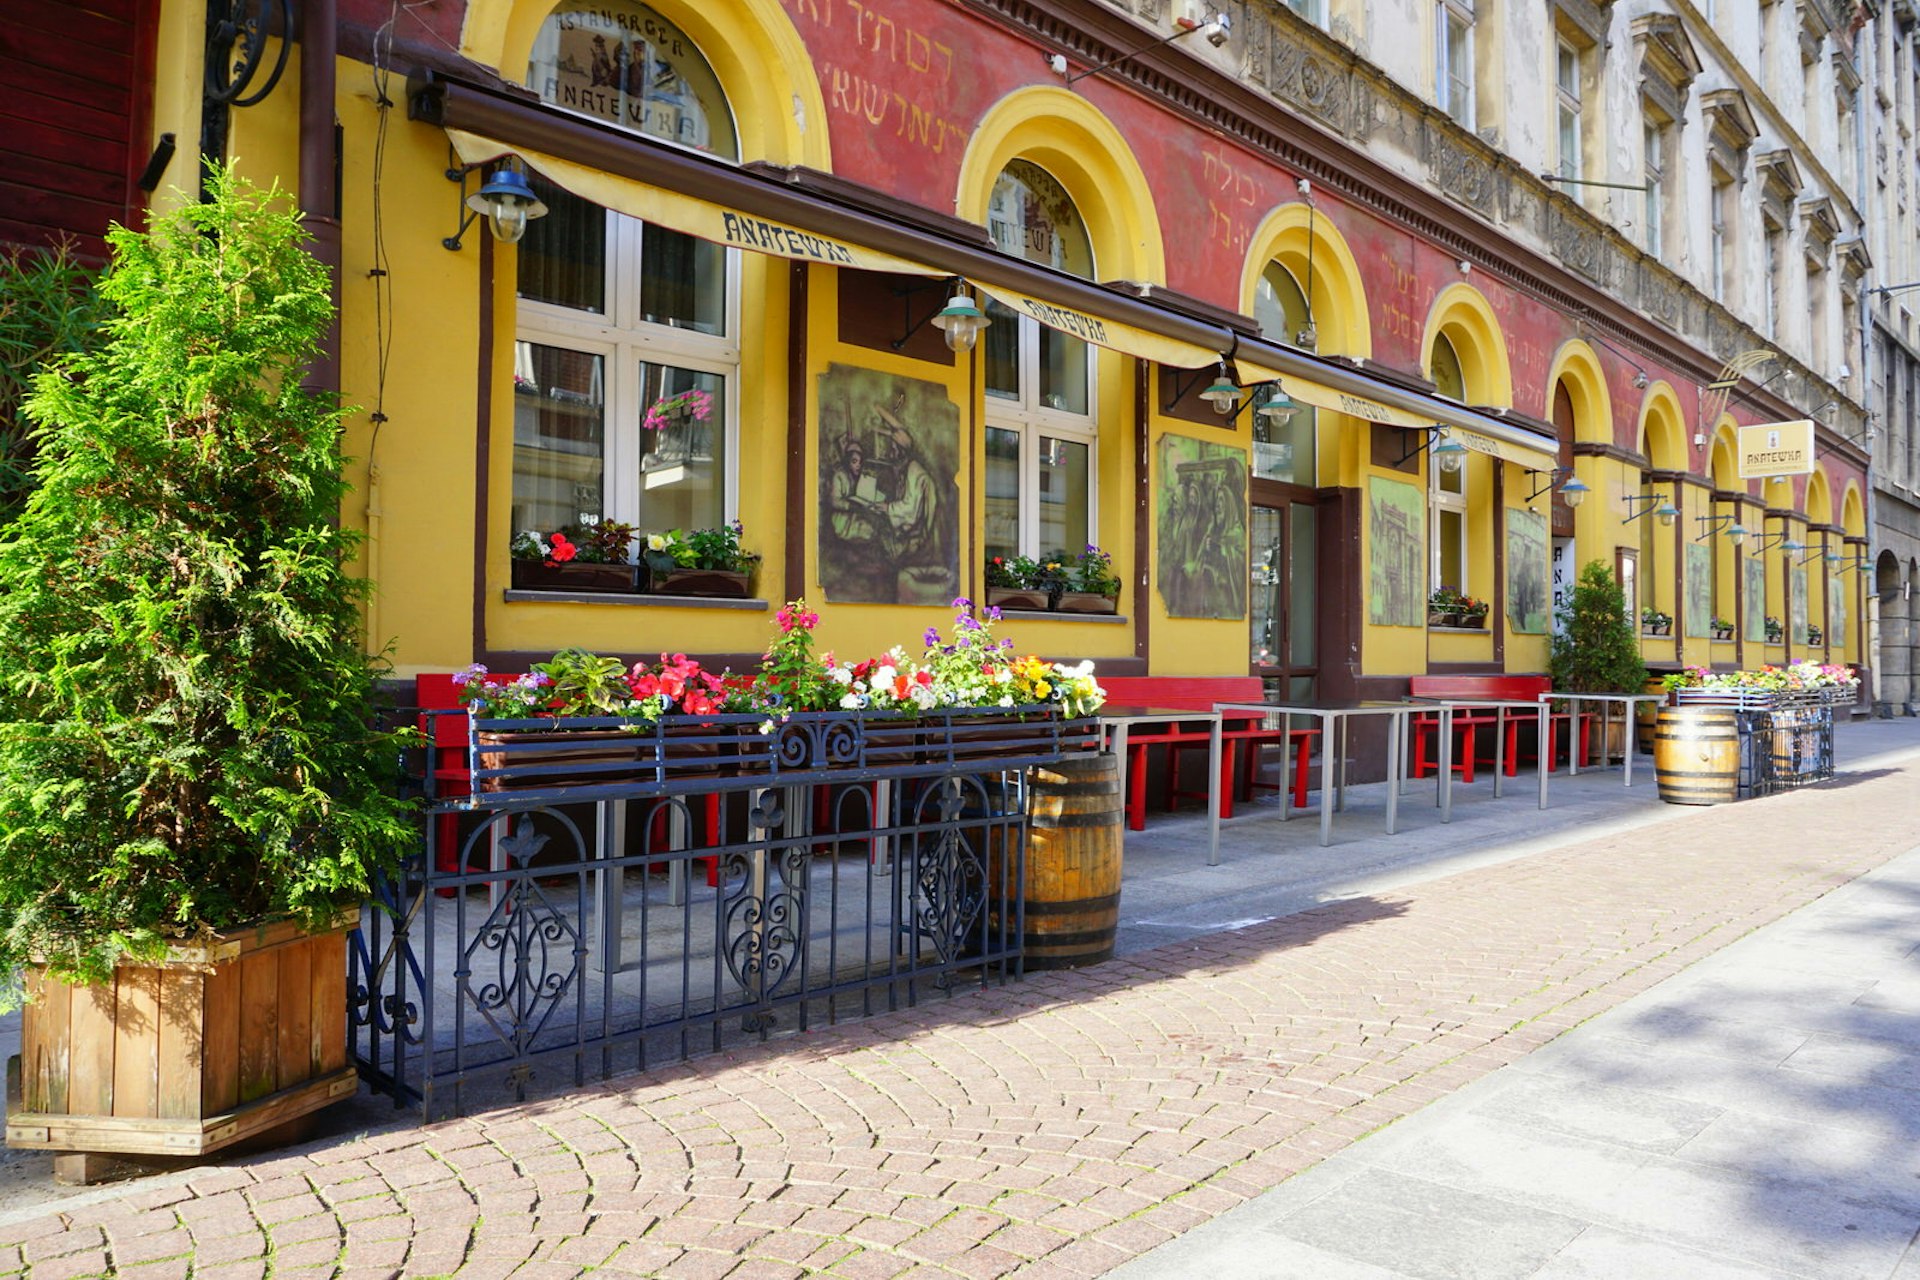 The exterior of popular Anatewka, which serves up delicious Jewish cuisine © Mariola Anna S / Shutterstock